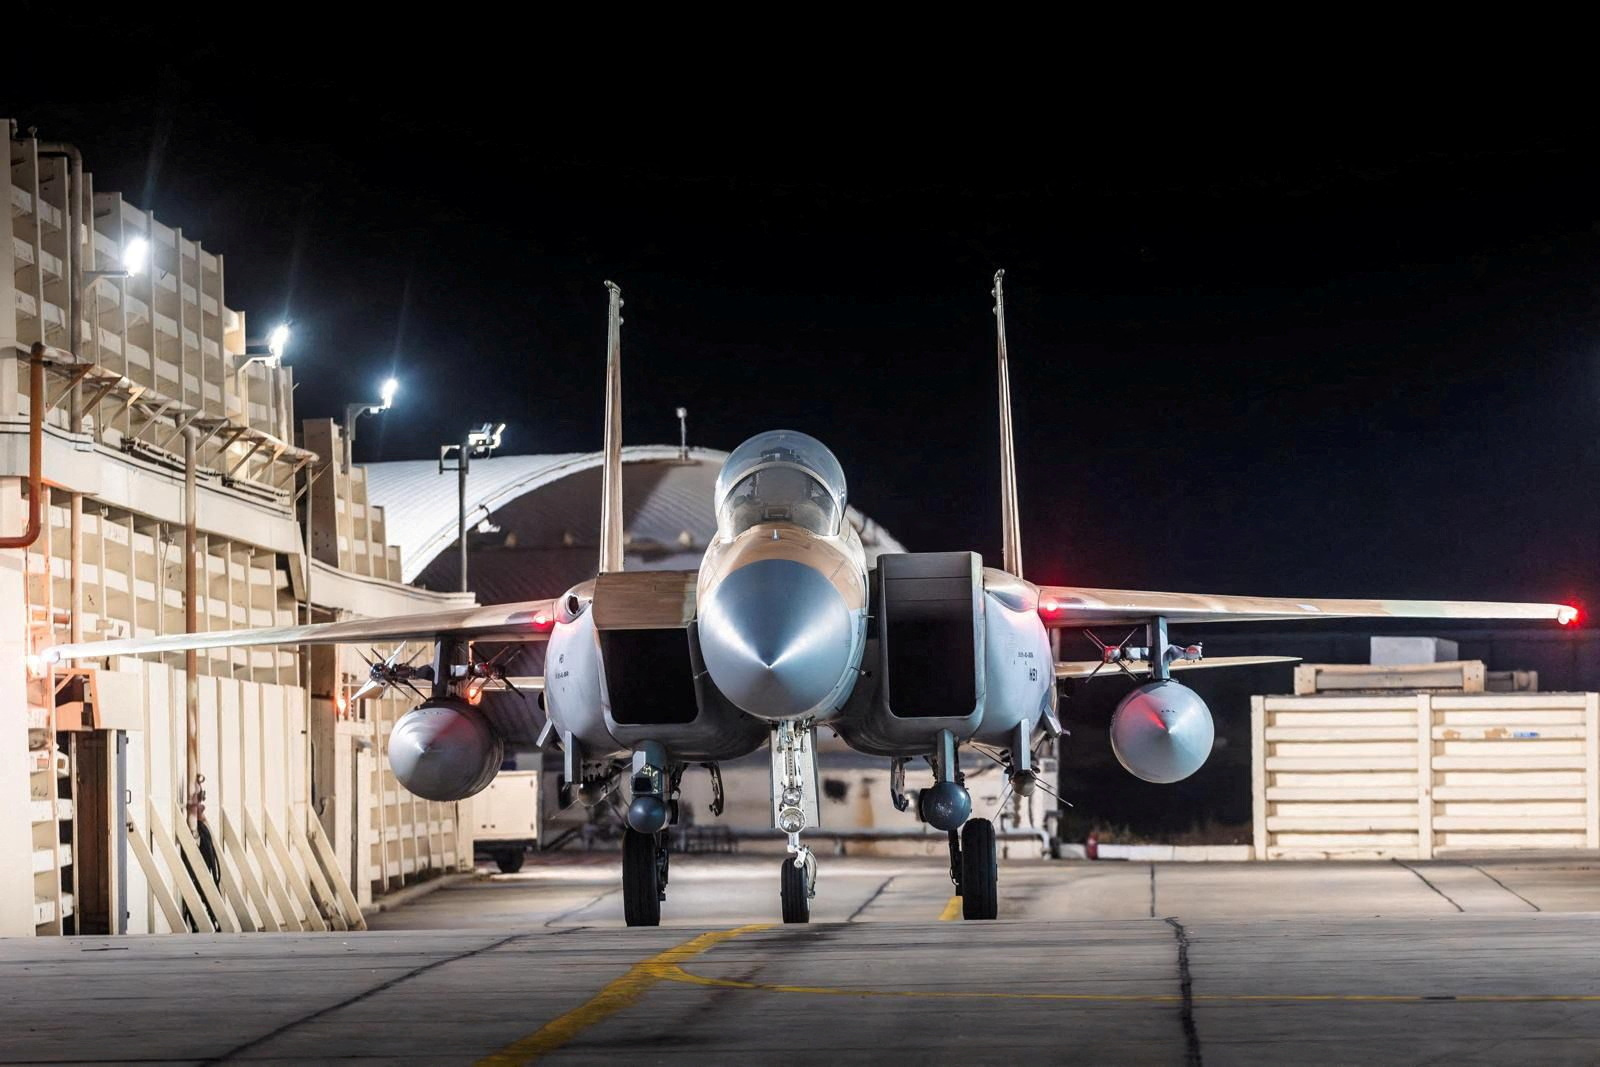 Israeli Air Force F-15 Eagle is pictured at an air base after an interception mission of an Iranian drone and missile attack on Israel